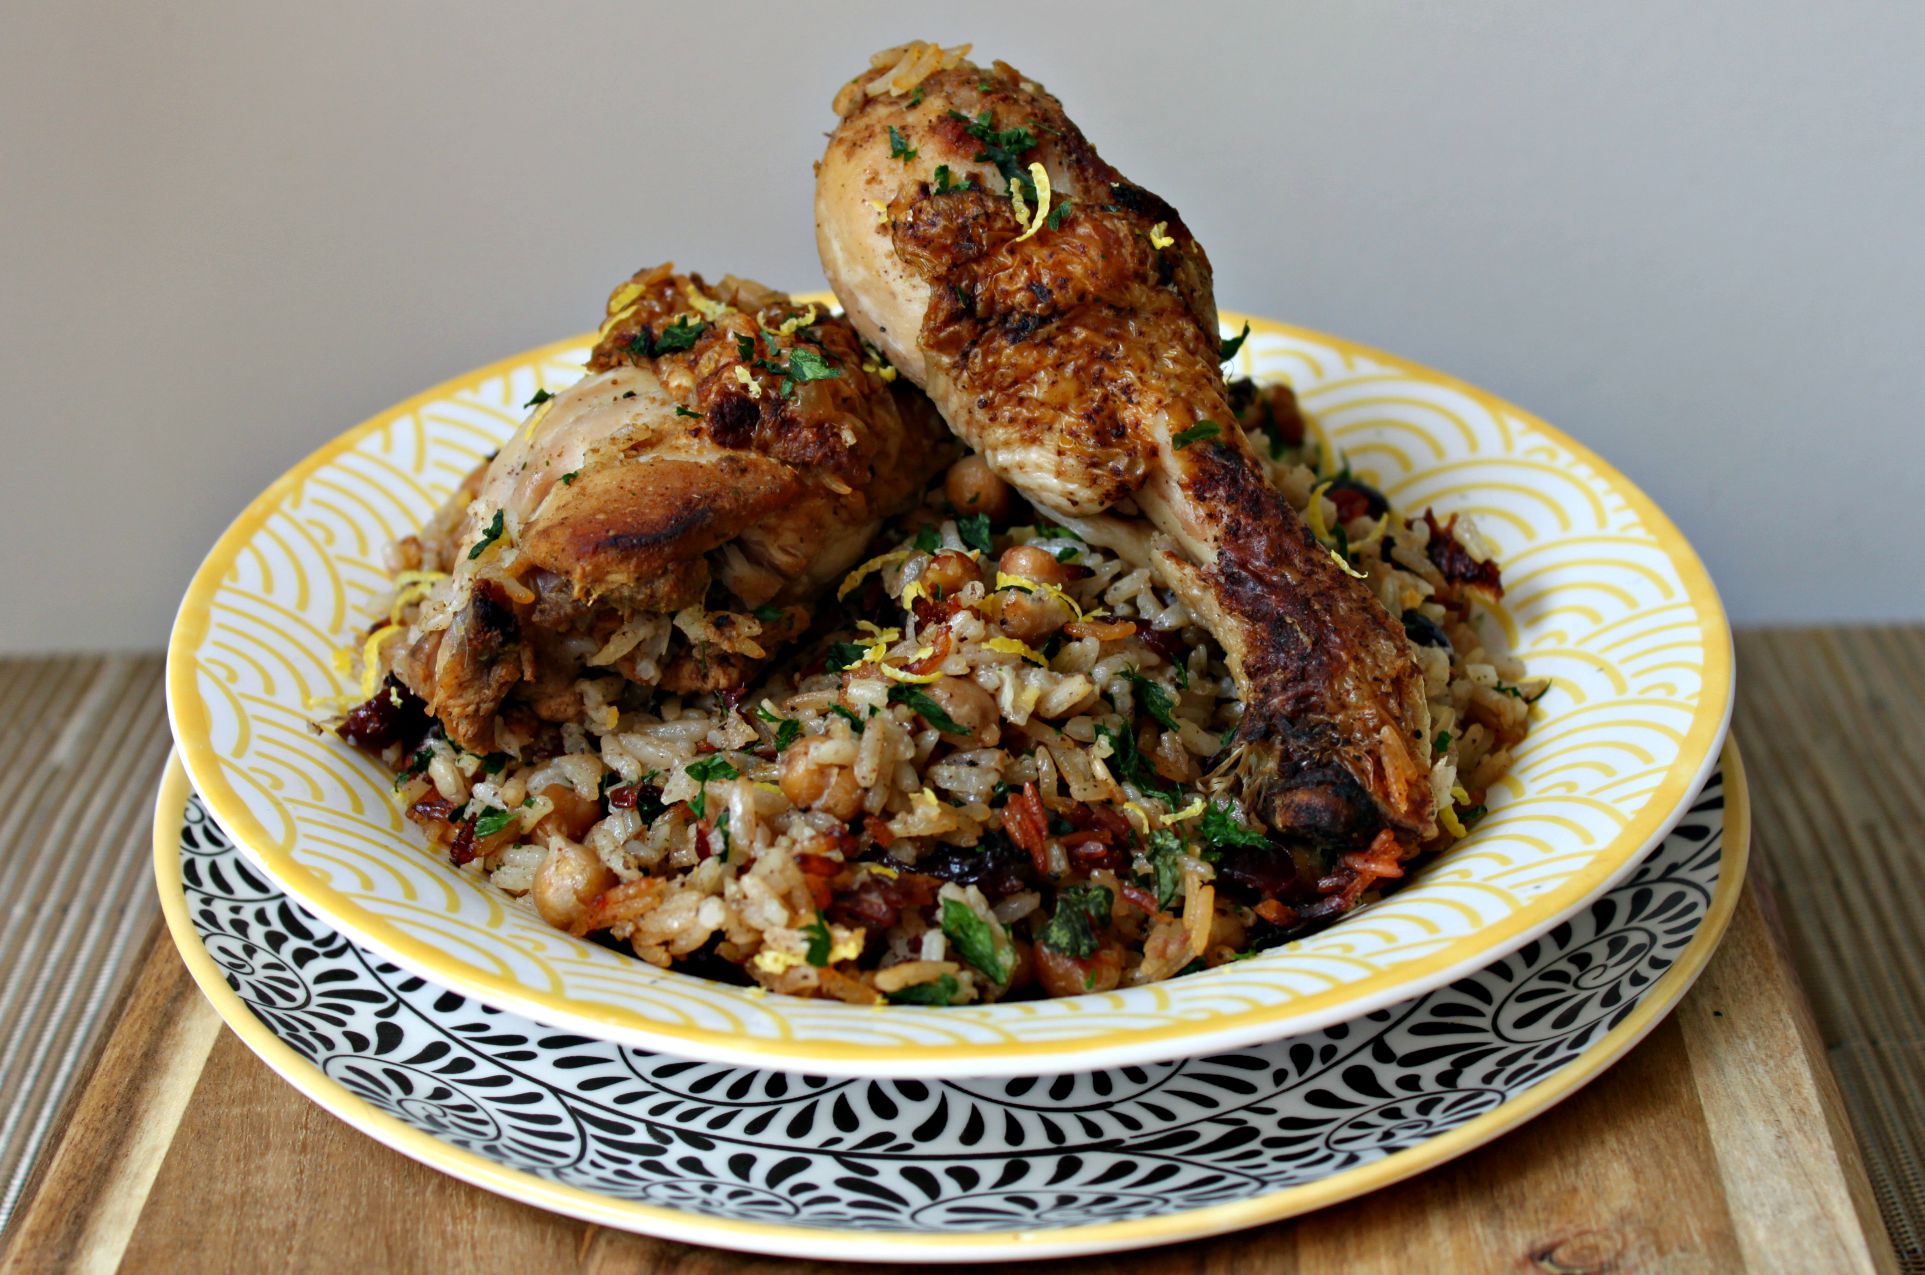 A fragrant yet mild middle eastern spiced chicken with chickpea and cranberry pilaf bursting with middle eastern flavours and all cooked in one pot!